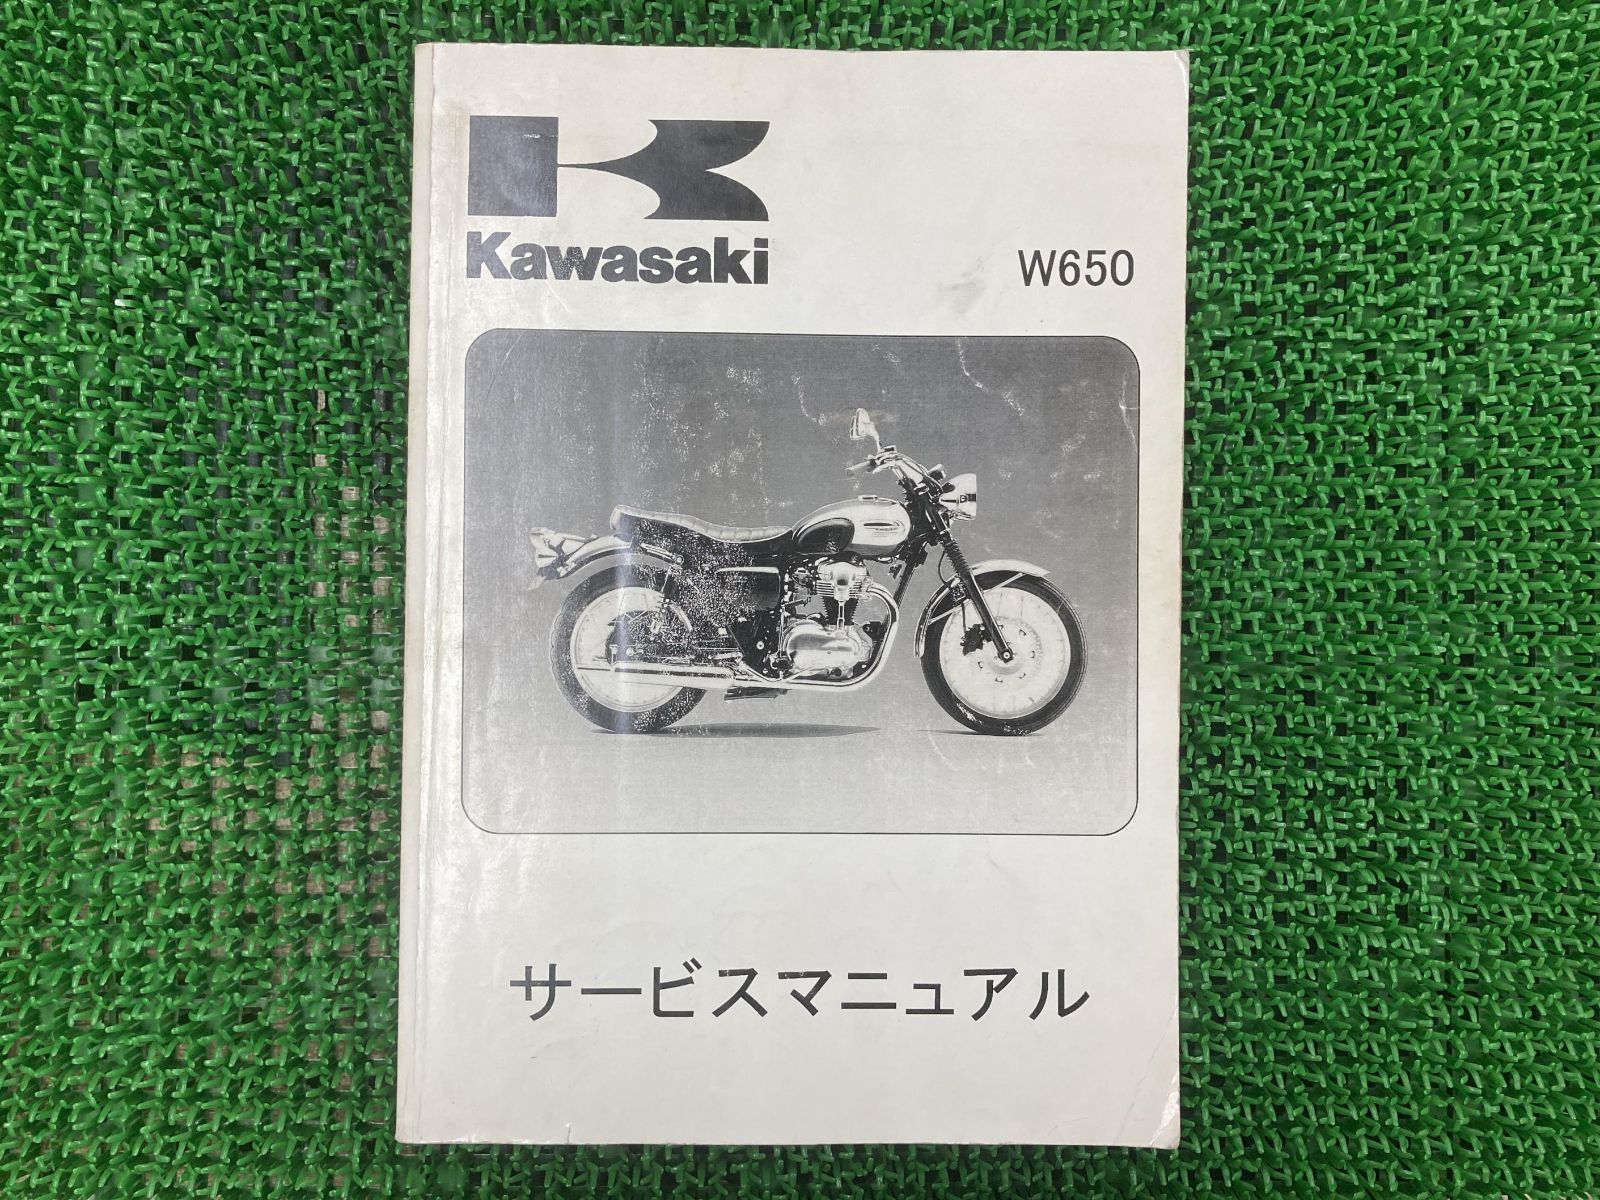 W650 サービスマニュアル 7版 配線図 カワサキ 正規  バイク 整備書 EJ650-A1 C1 A3 C3 A4 C4 車検 整備情報:22289556